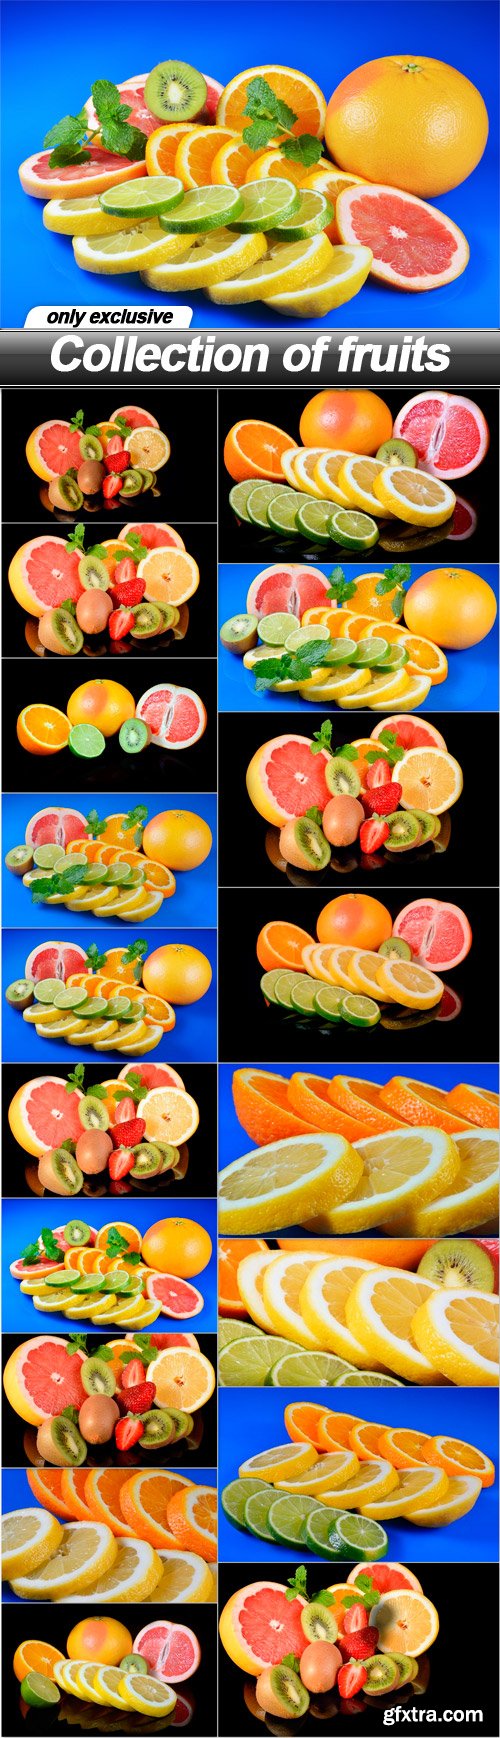 Collection of fruits - 18 UHQ JPEG